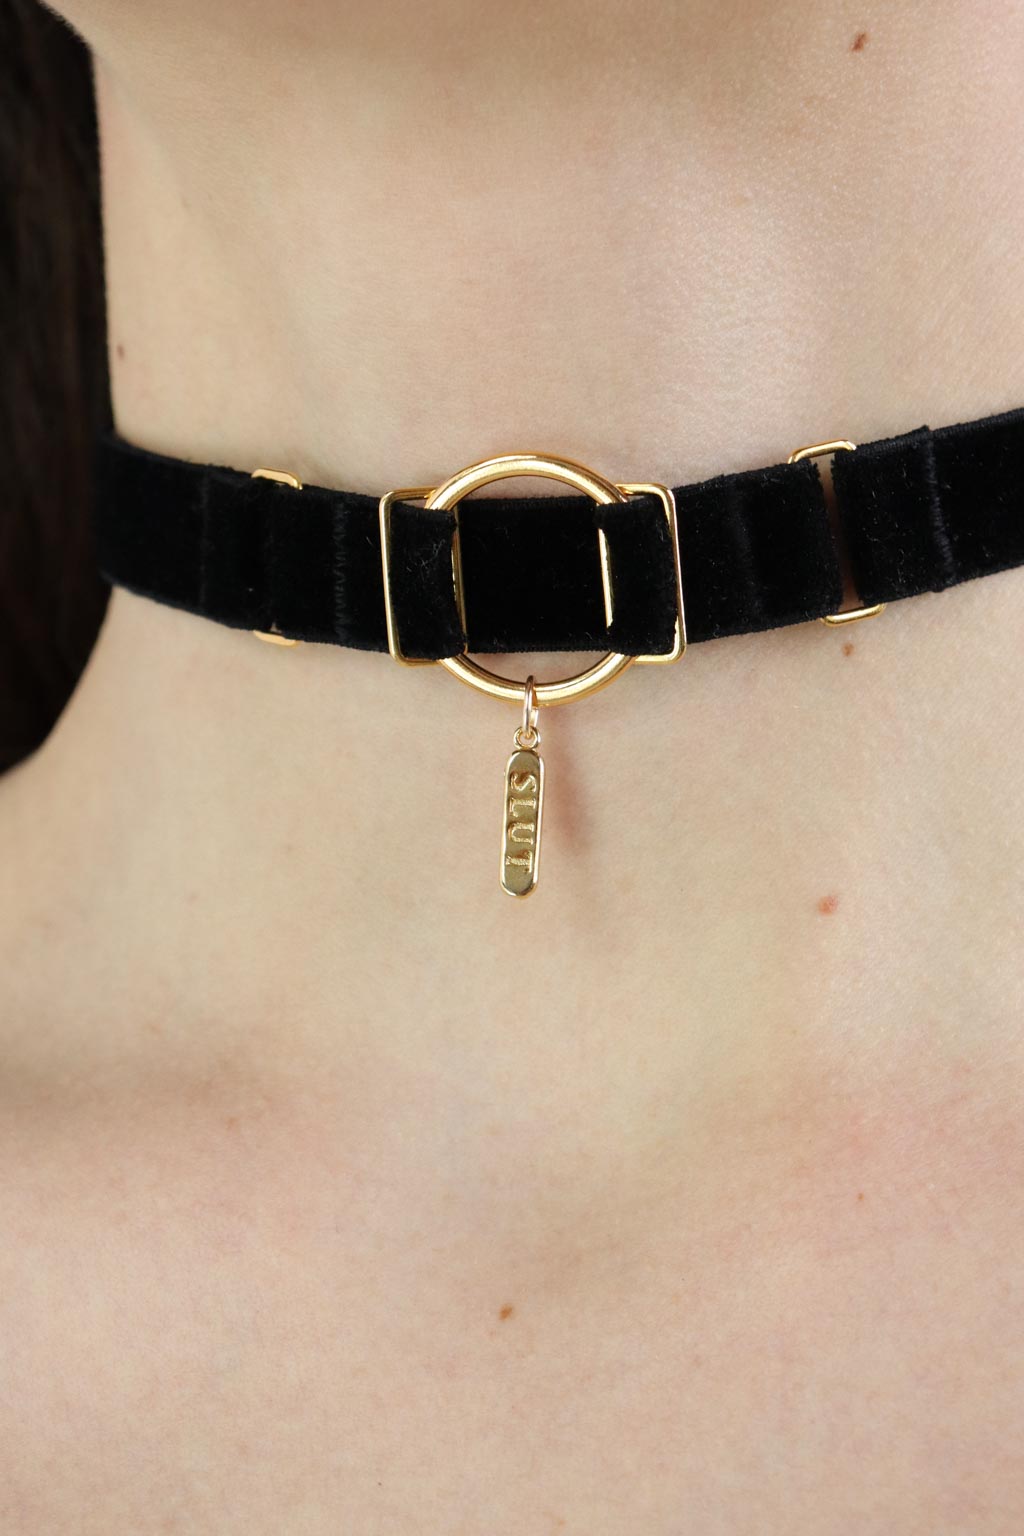 Black Leather Choker Necklace for Women Choker With Golden Buckle